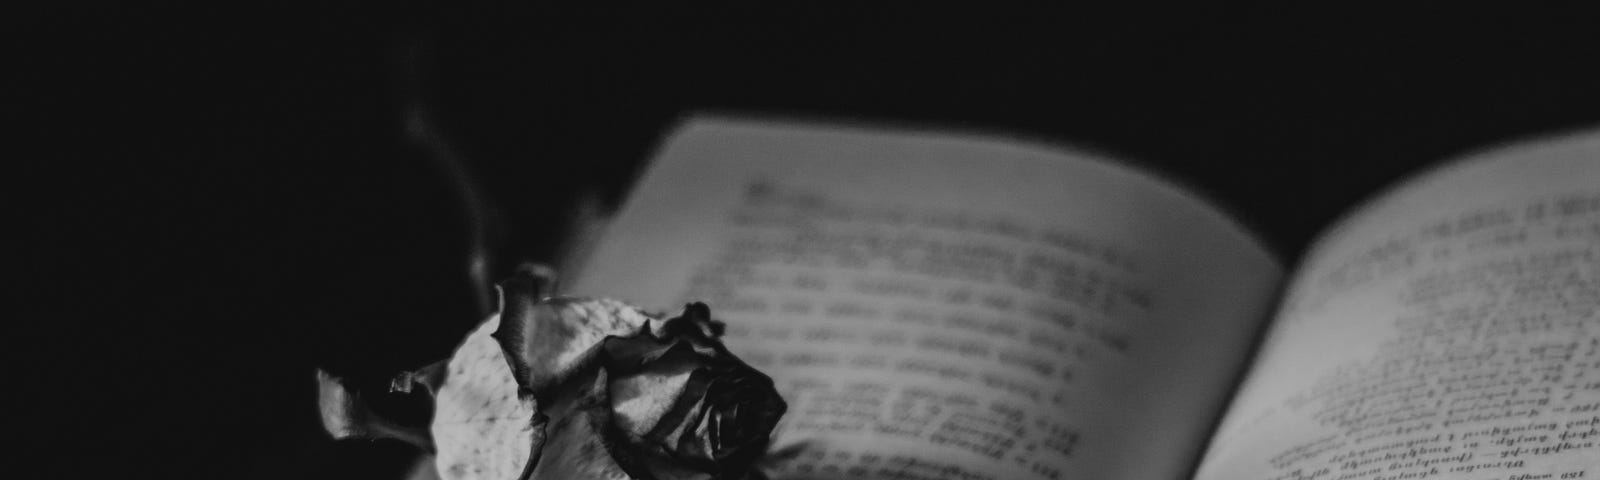 A book lies open beneath the crumpled remains of a burning page.